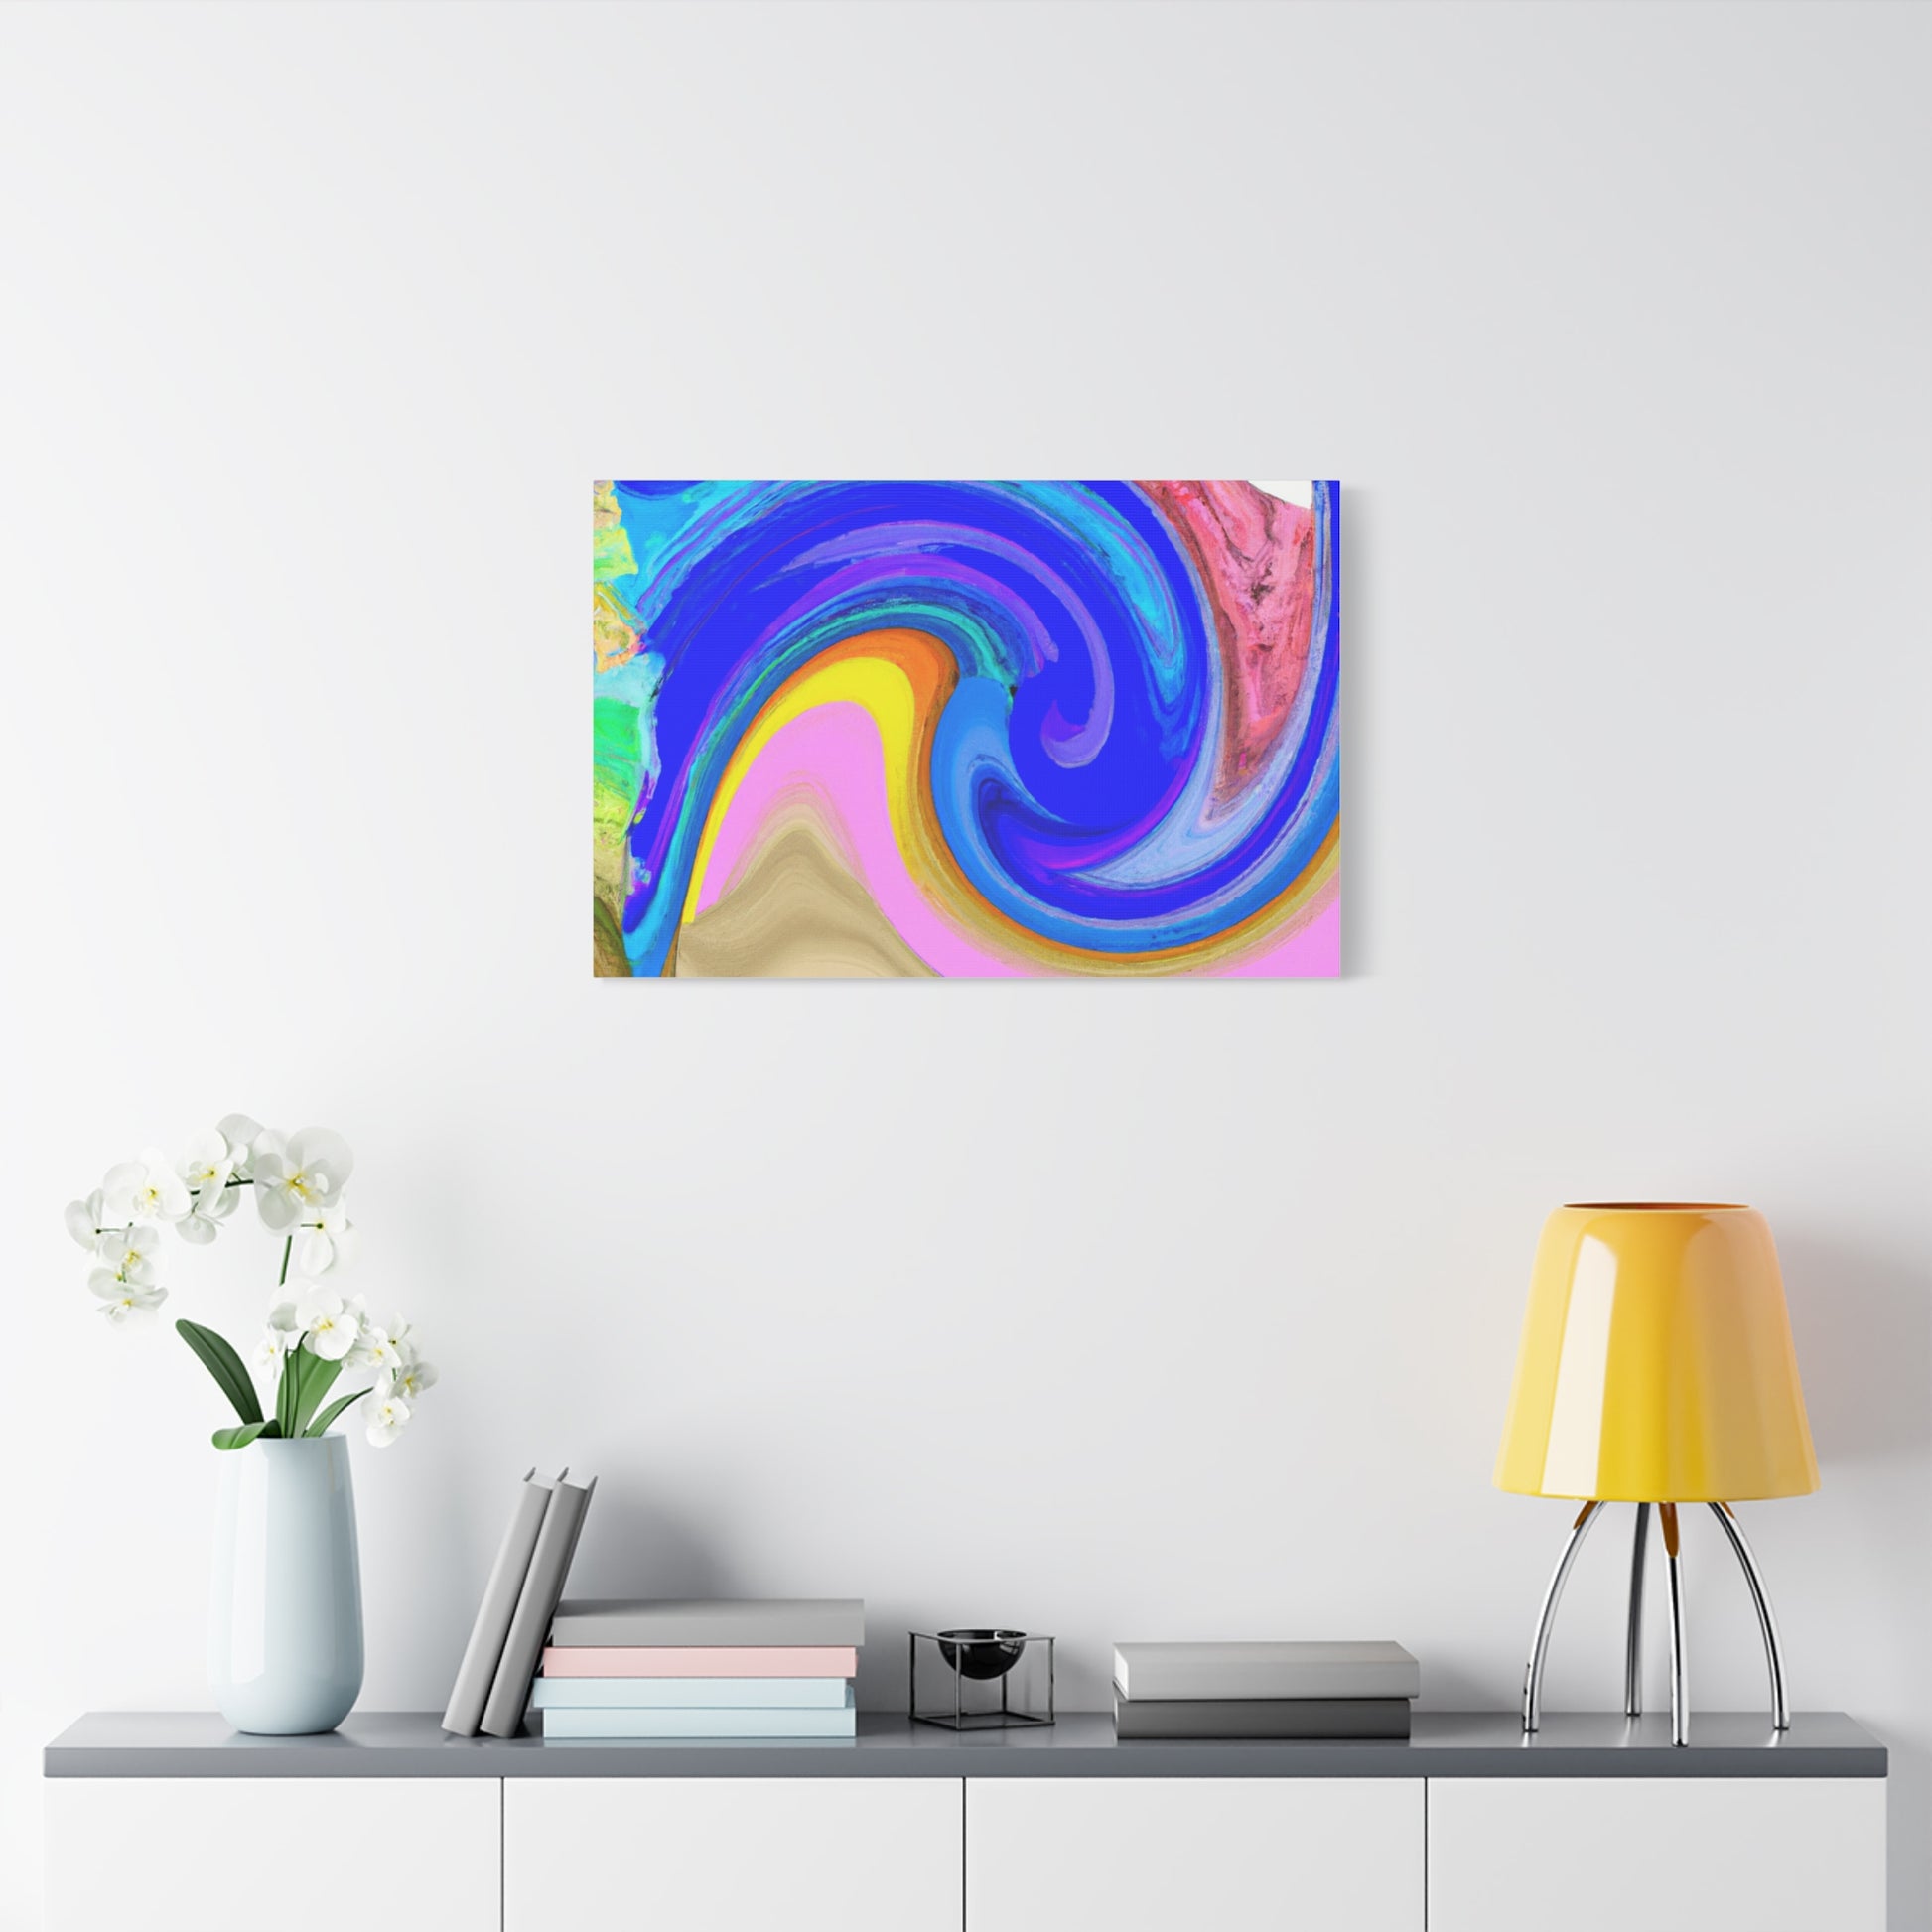 Abstract Surreal Style Decor Hanging Wall Painting Canvas Wall Art Print